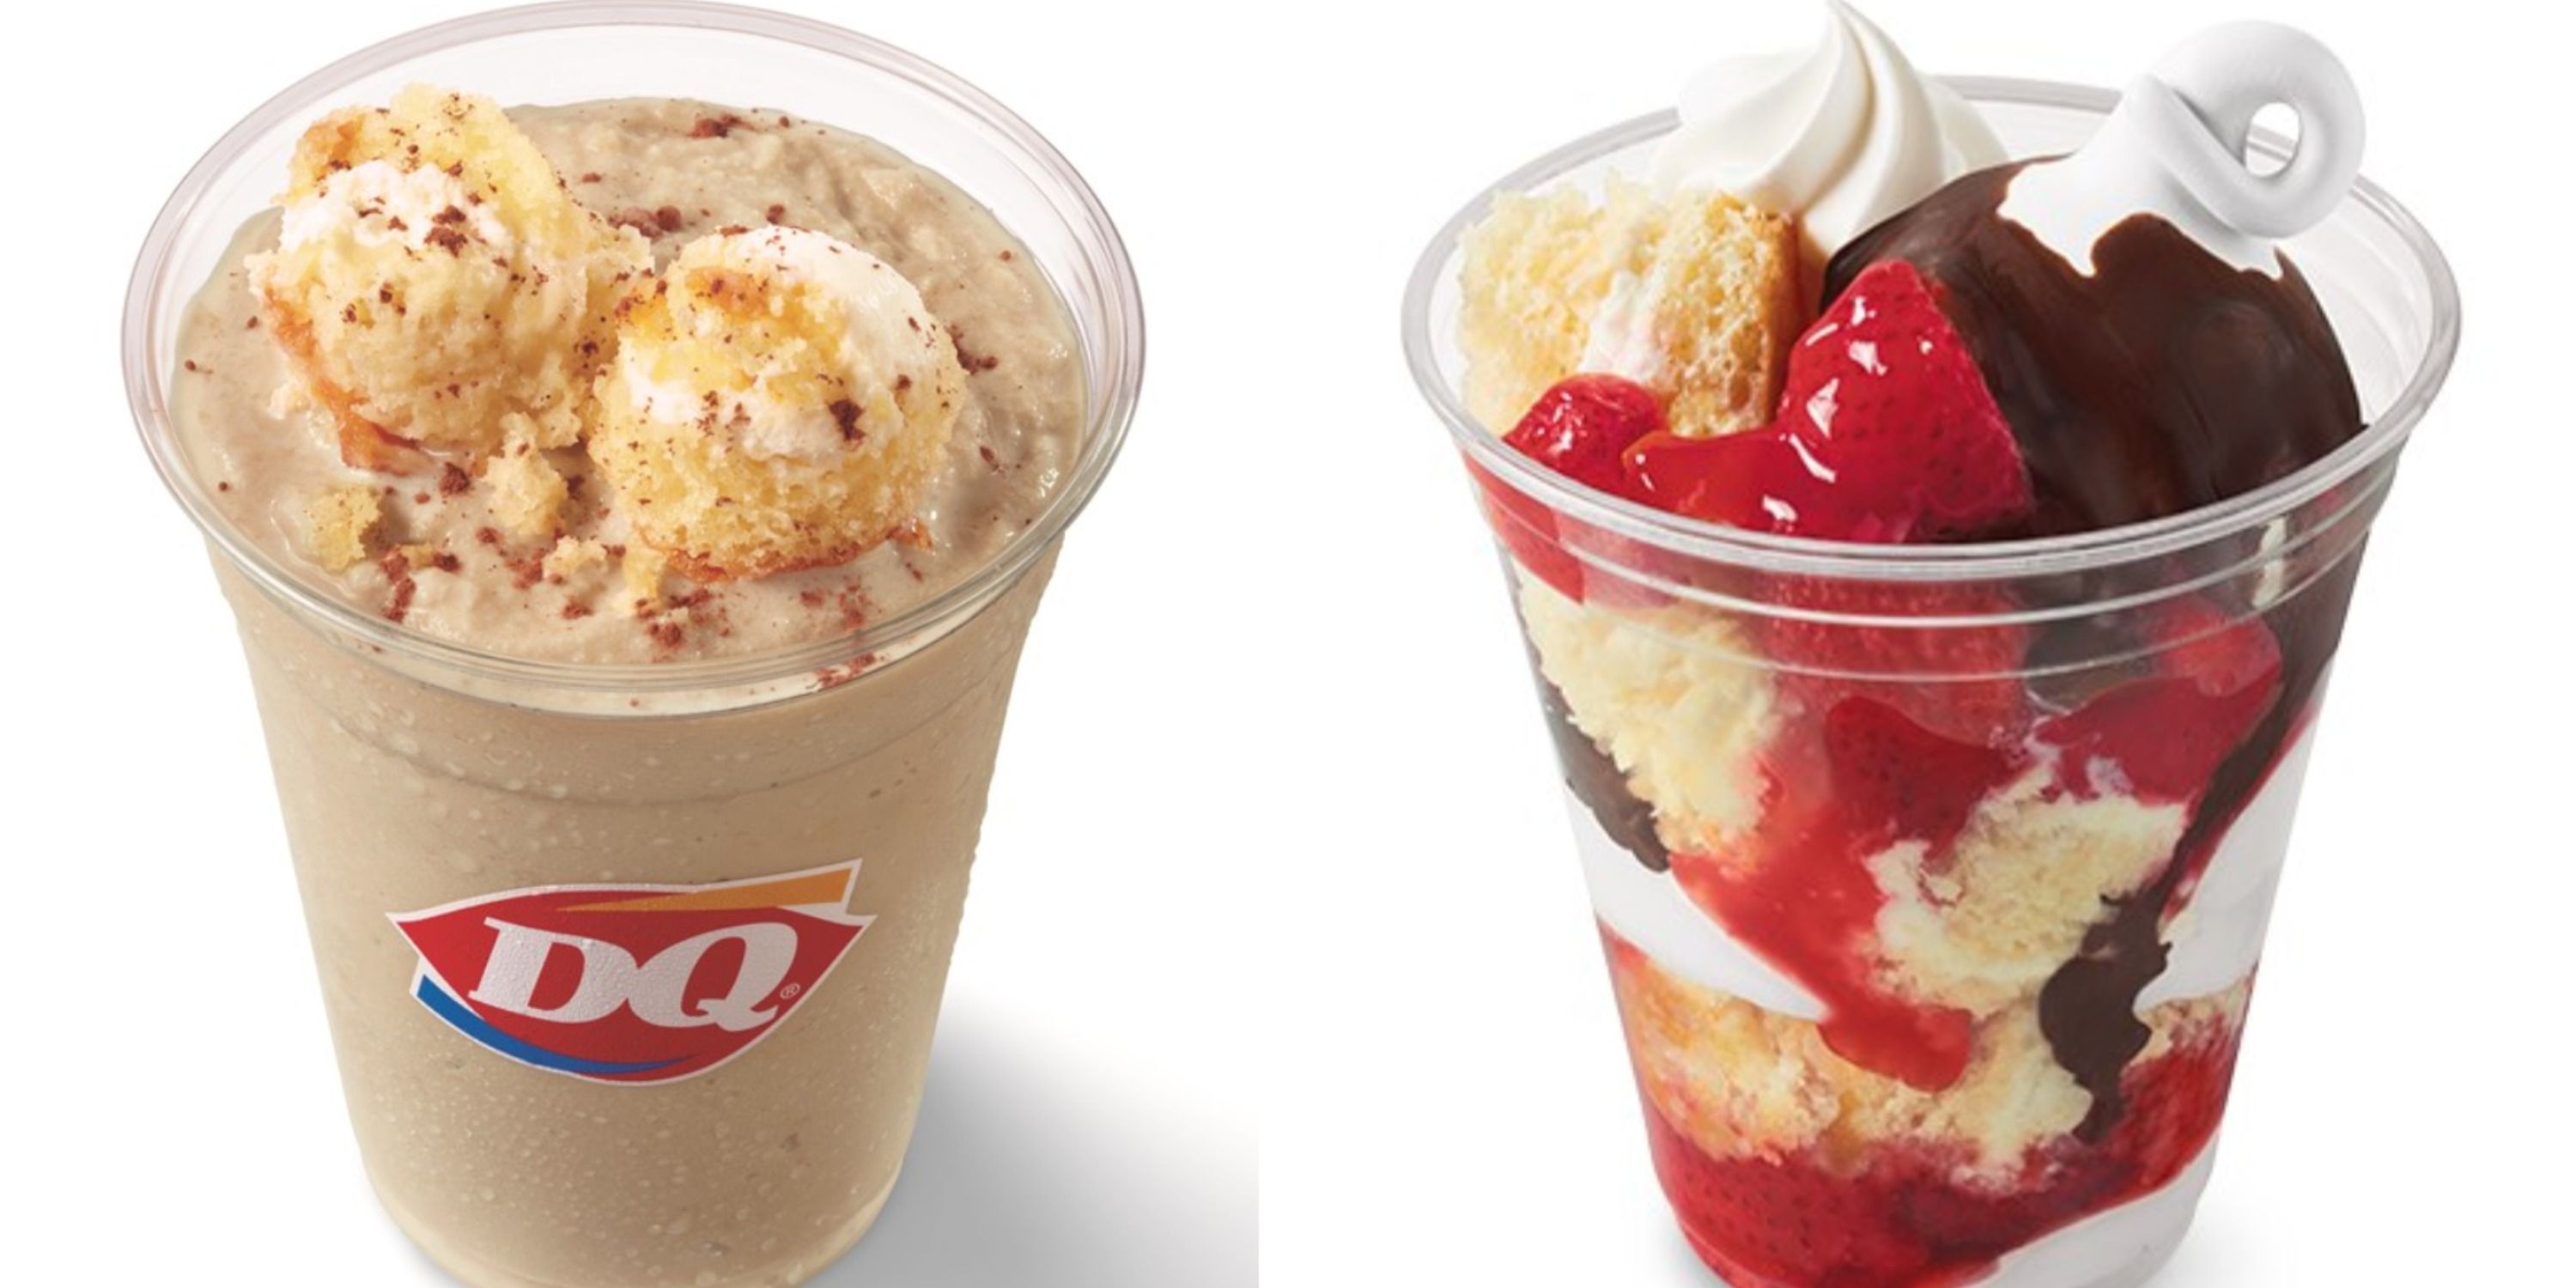 Does Dairy Queen Have Sundaes.